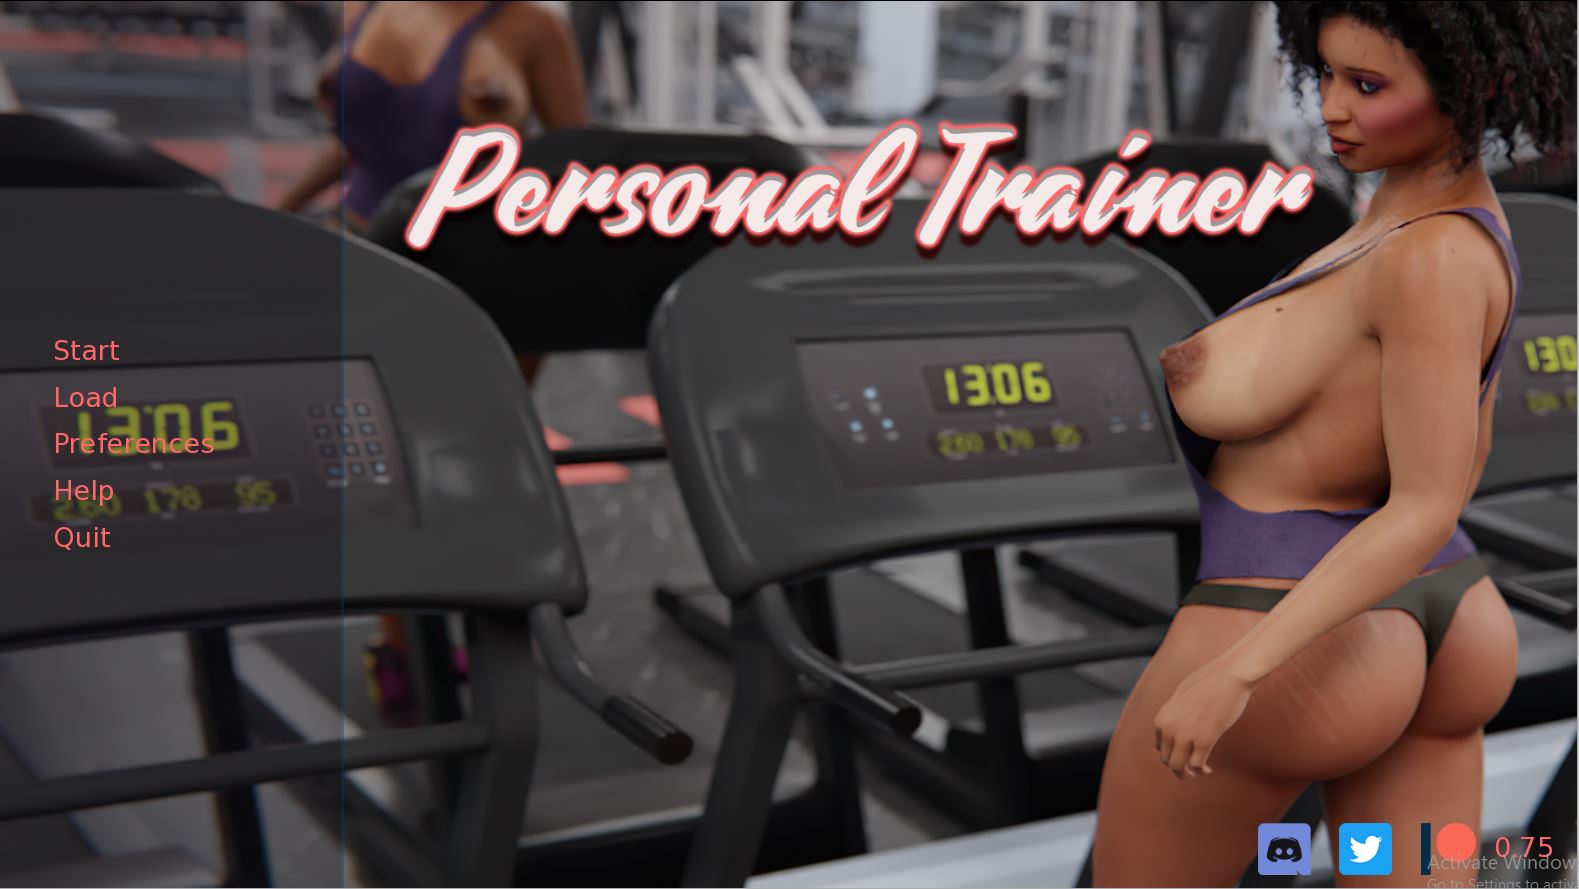 Jgjg X X X - Personal Trainer â€“ New Final Version 1.0 (Full Game) - Adult Games Collector